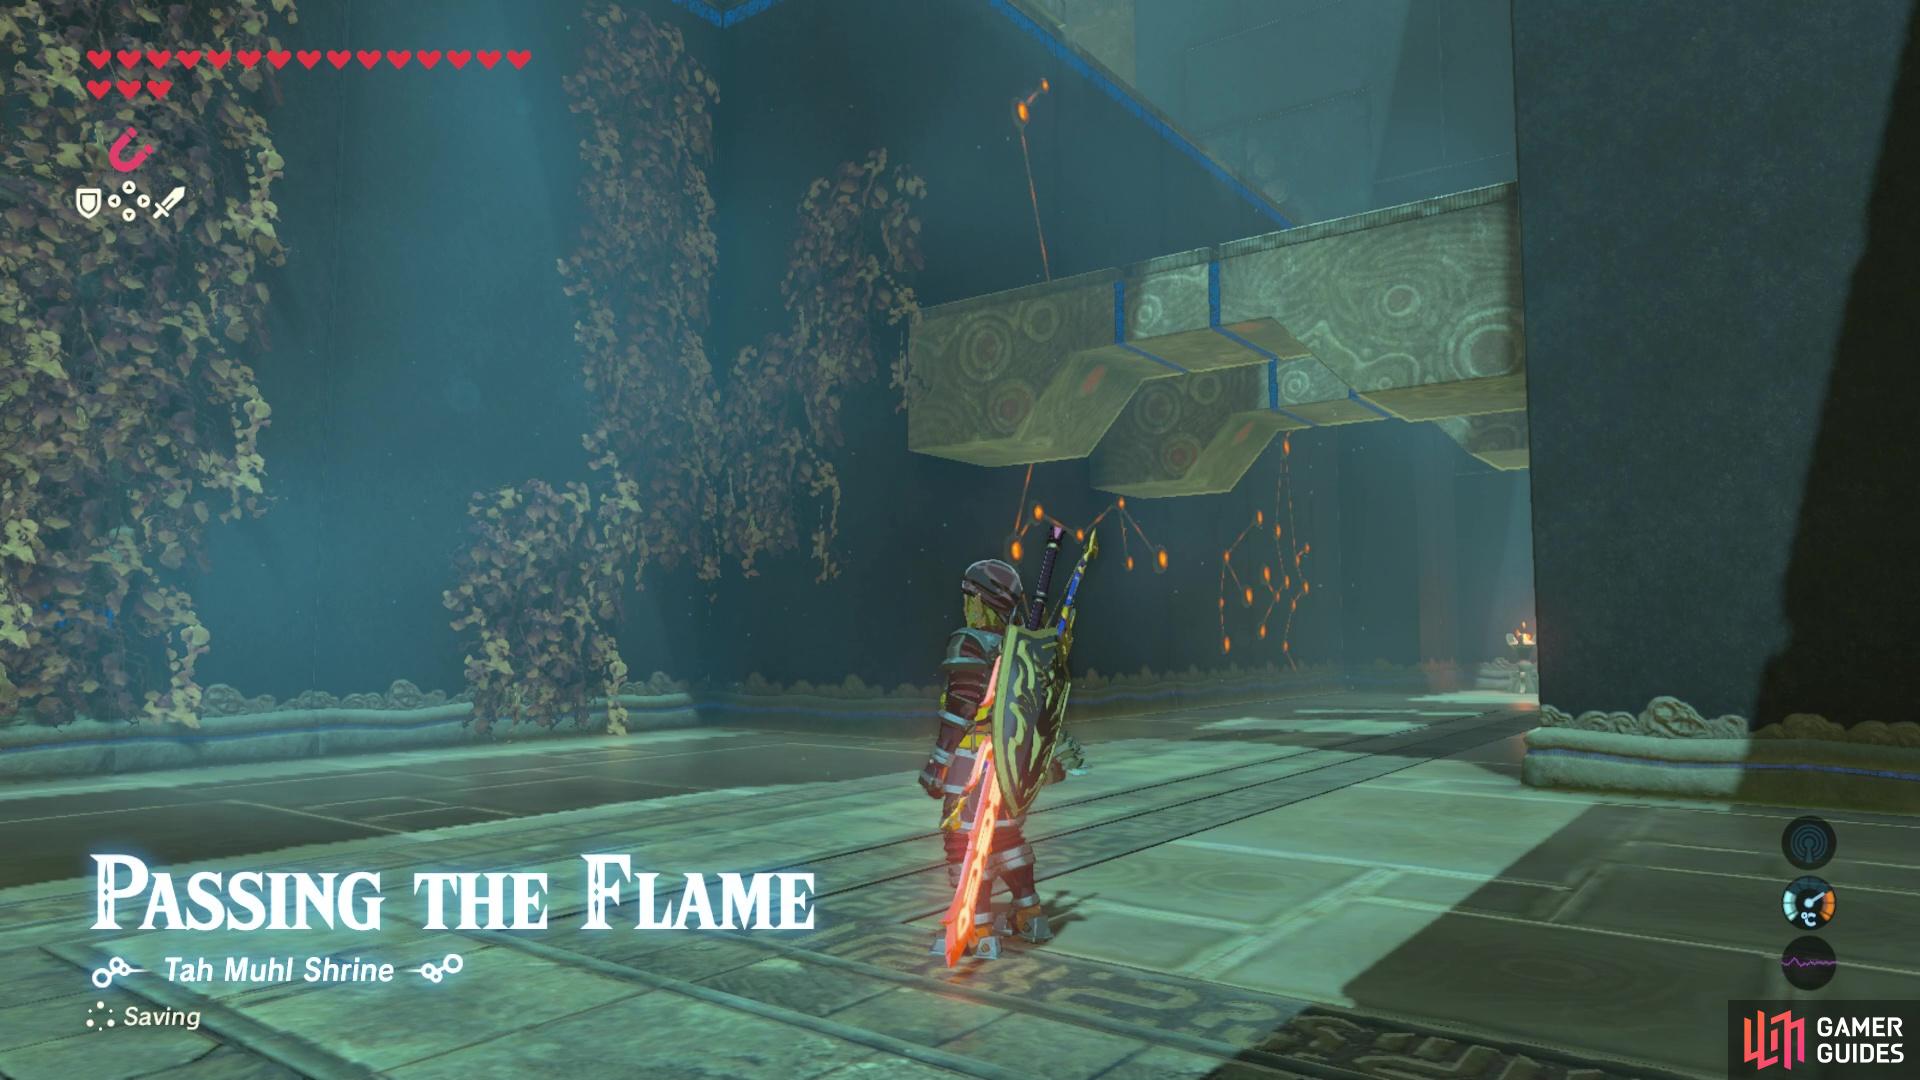 the aim of the game is to use flames to burn ivy and to reveal secrets throughout the shrine. 